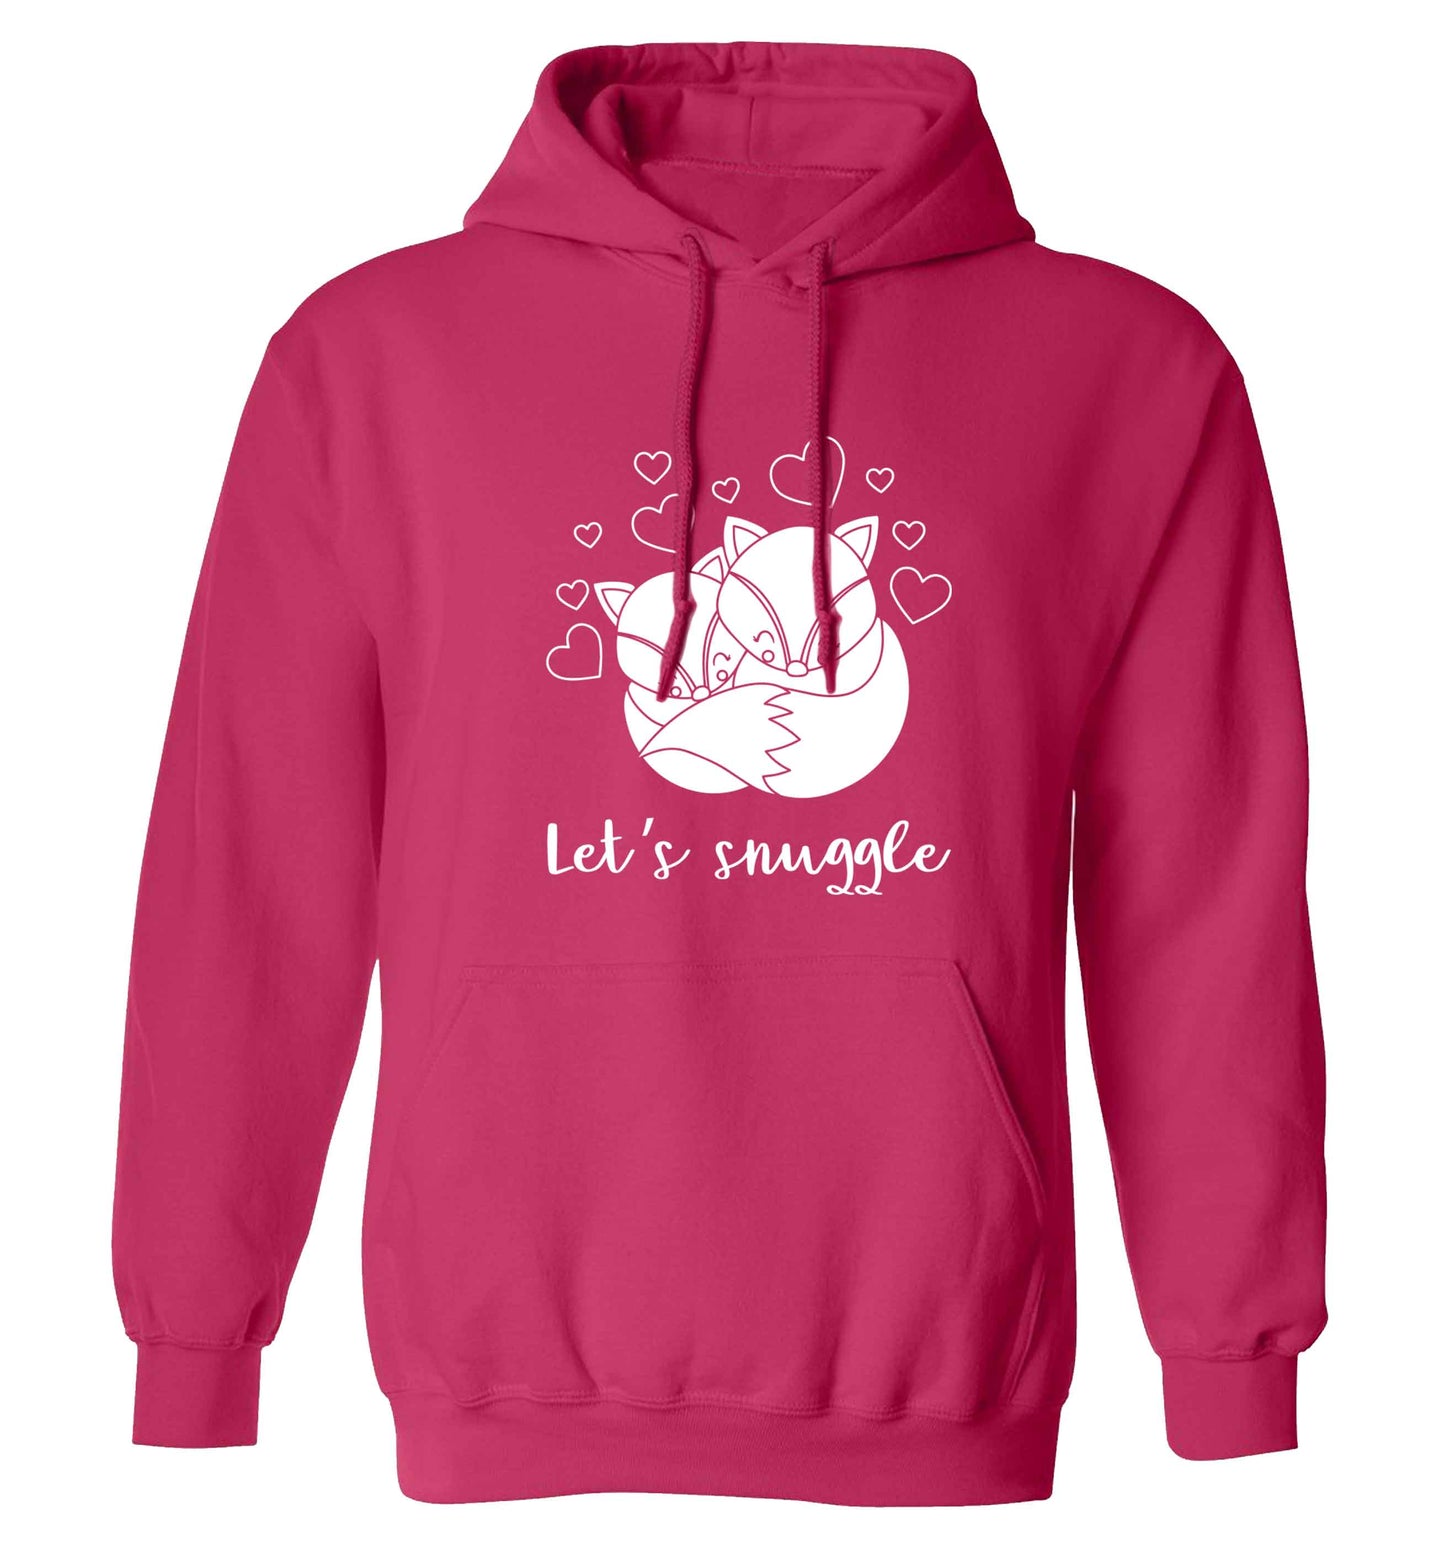 Let's snuggle adults unisex pink hoodie 2XL